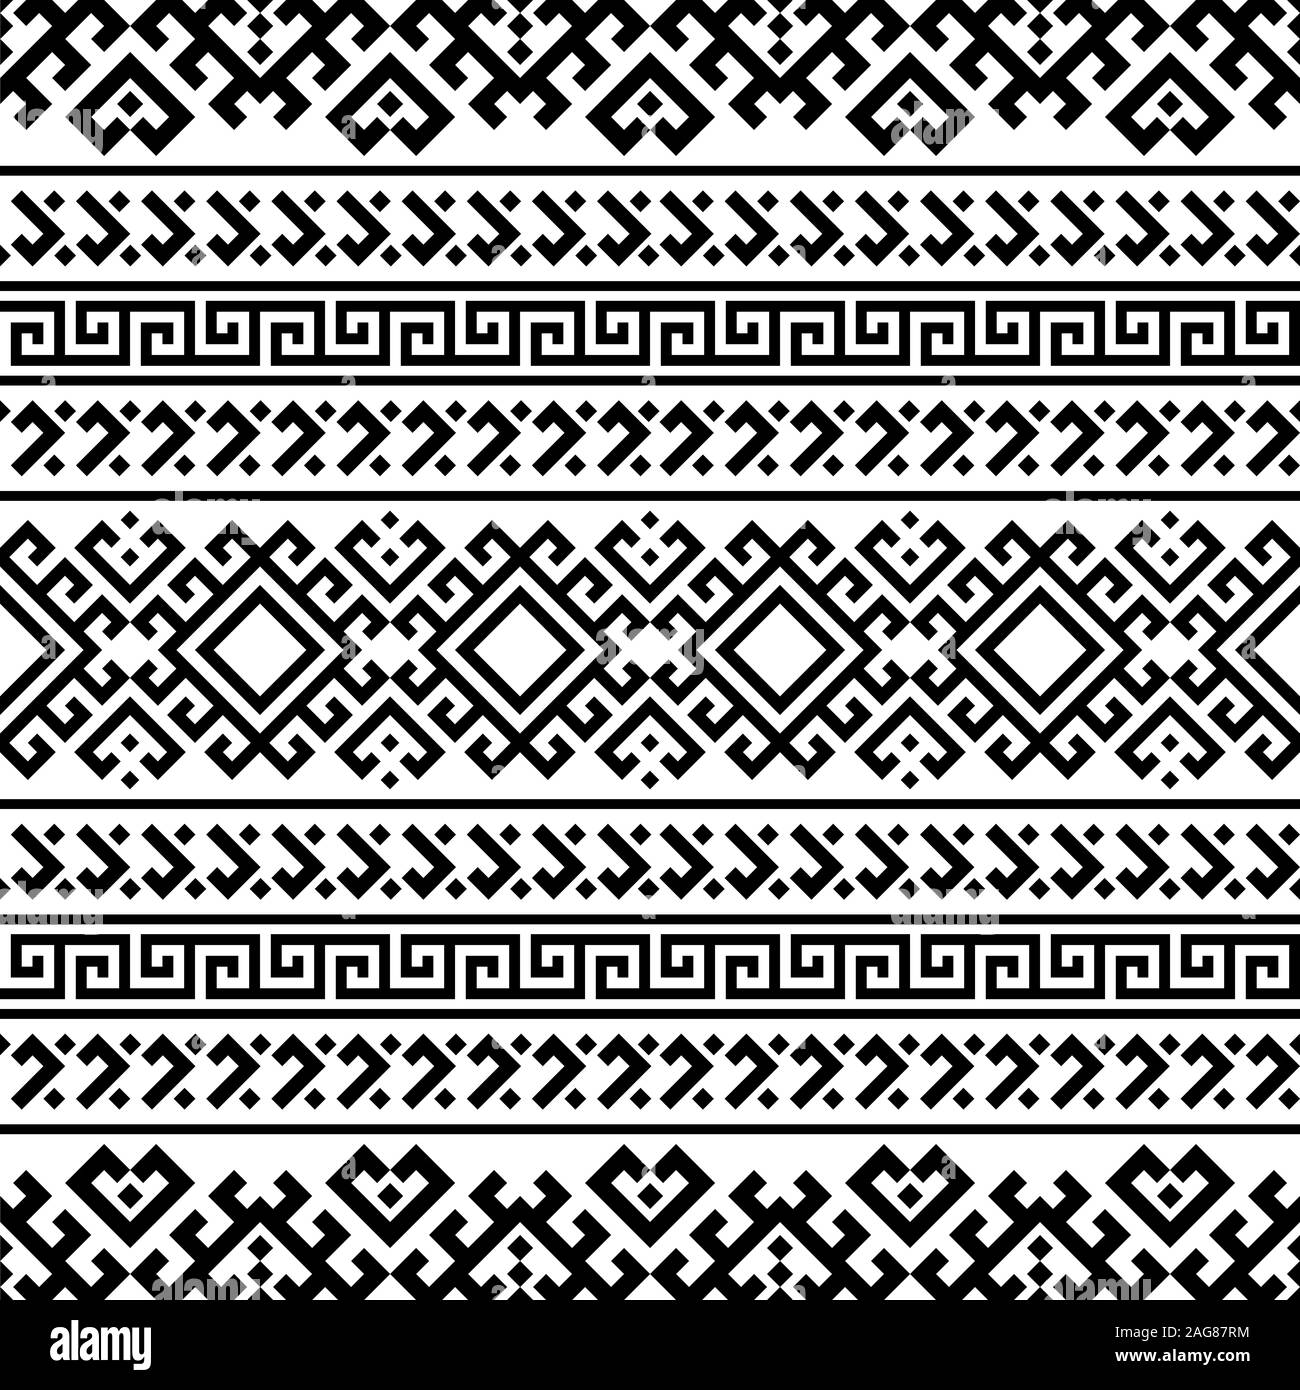 Tribal ethnic pattern in black and white color. Design for background ...